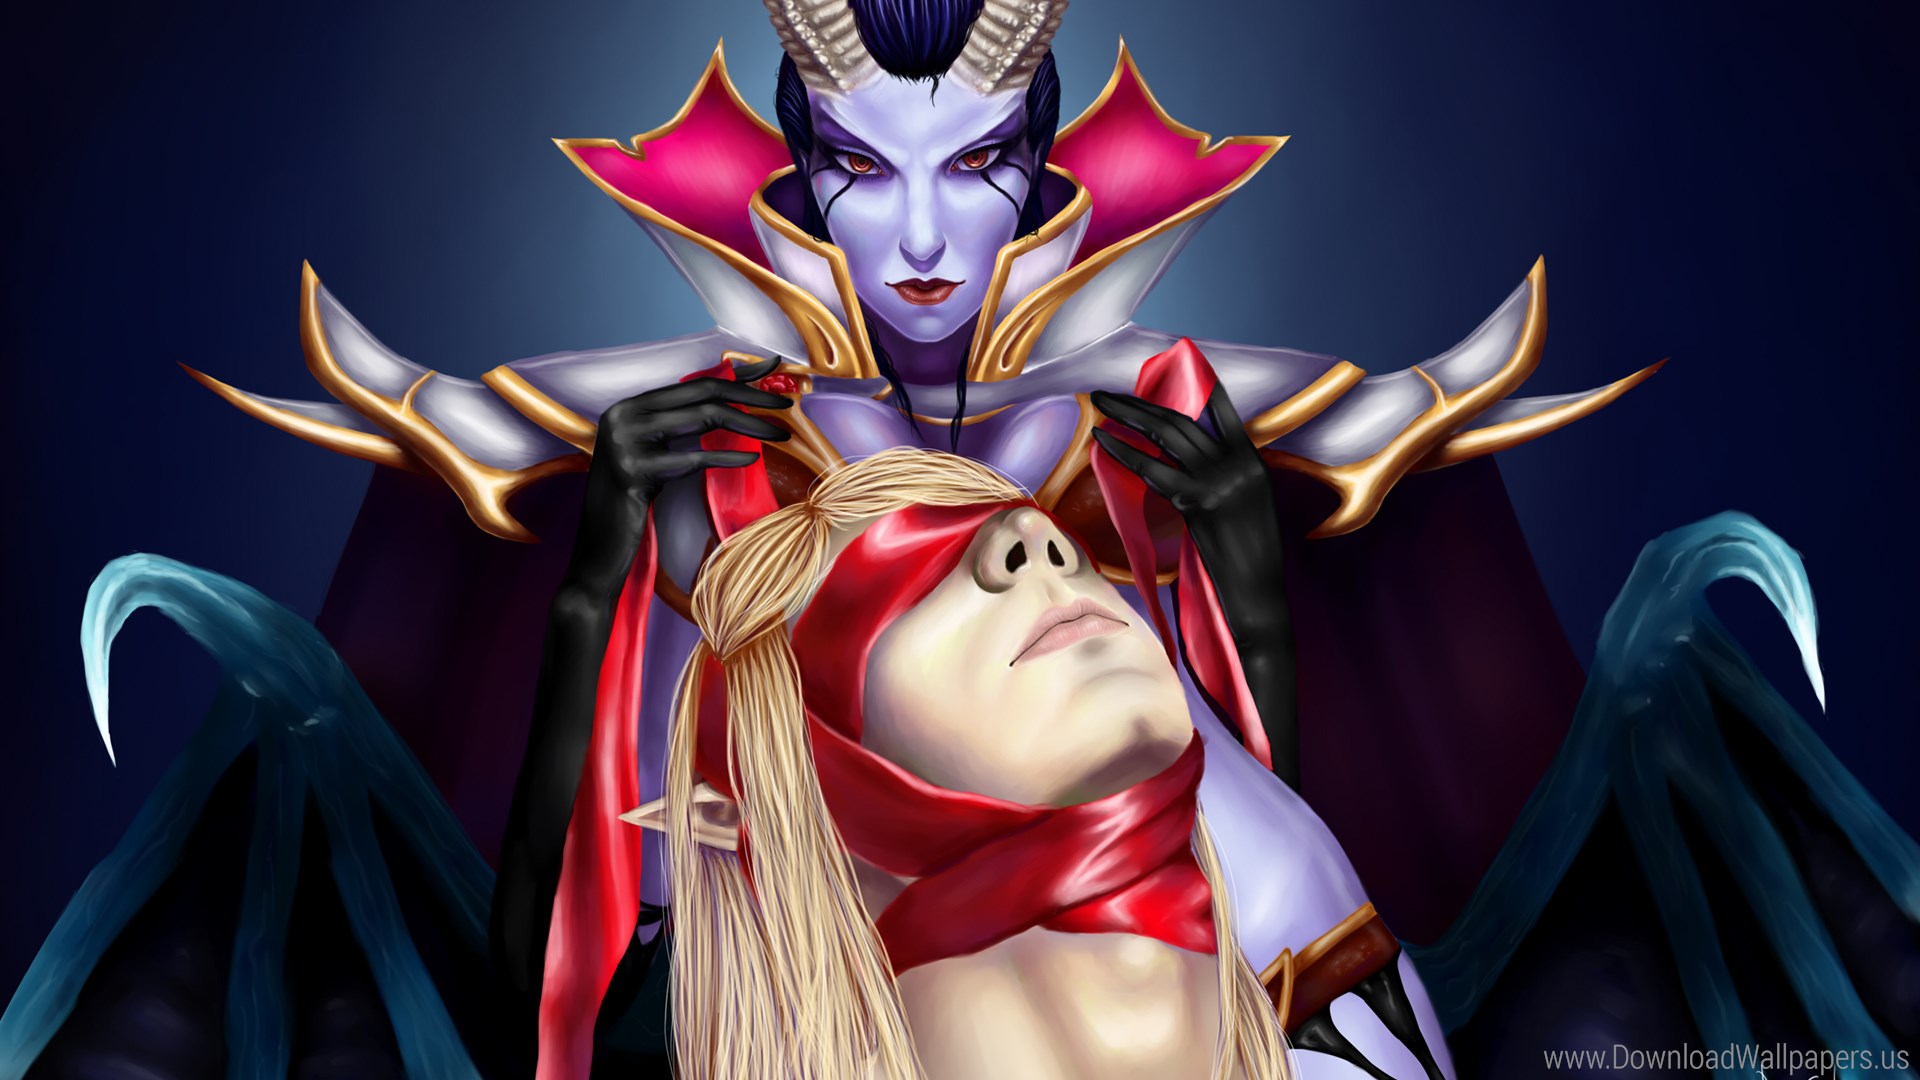 Download Widescreen - Dota 2 Invoker Wallpaper Hd For Android , HD Wallpaper & Backgrounds